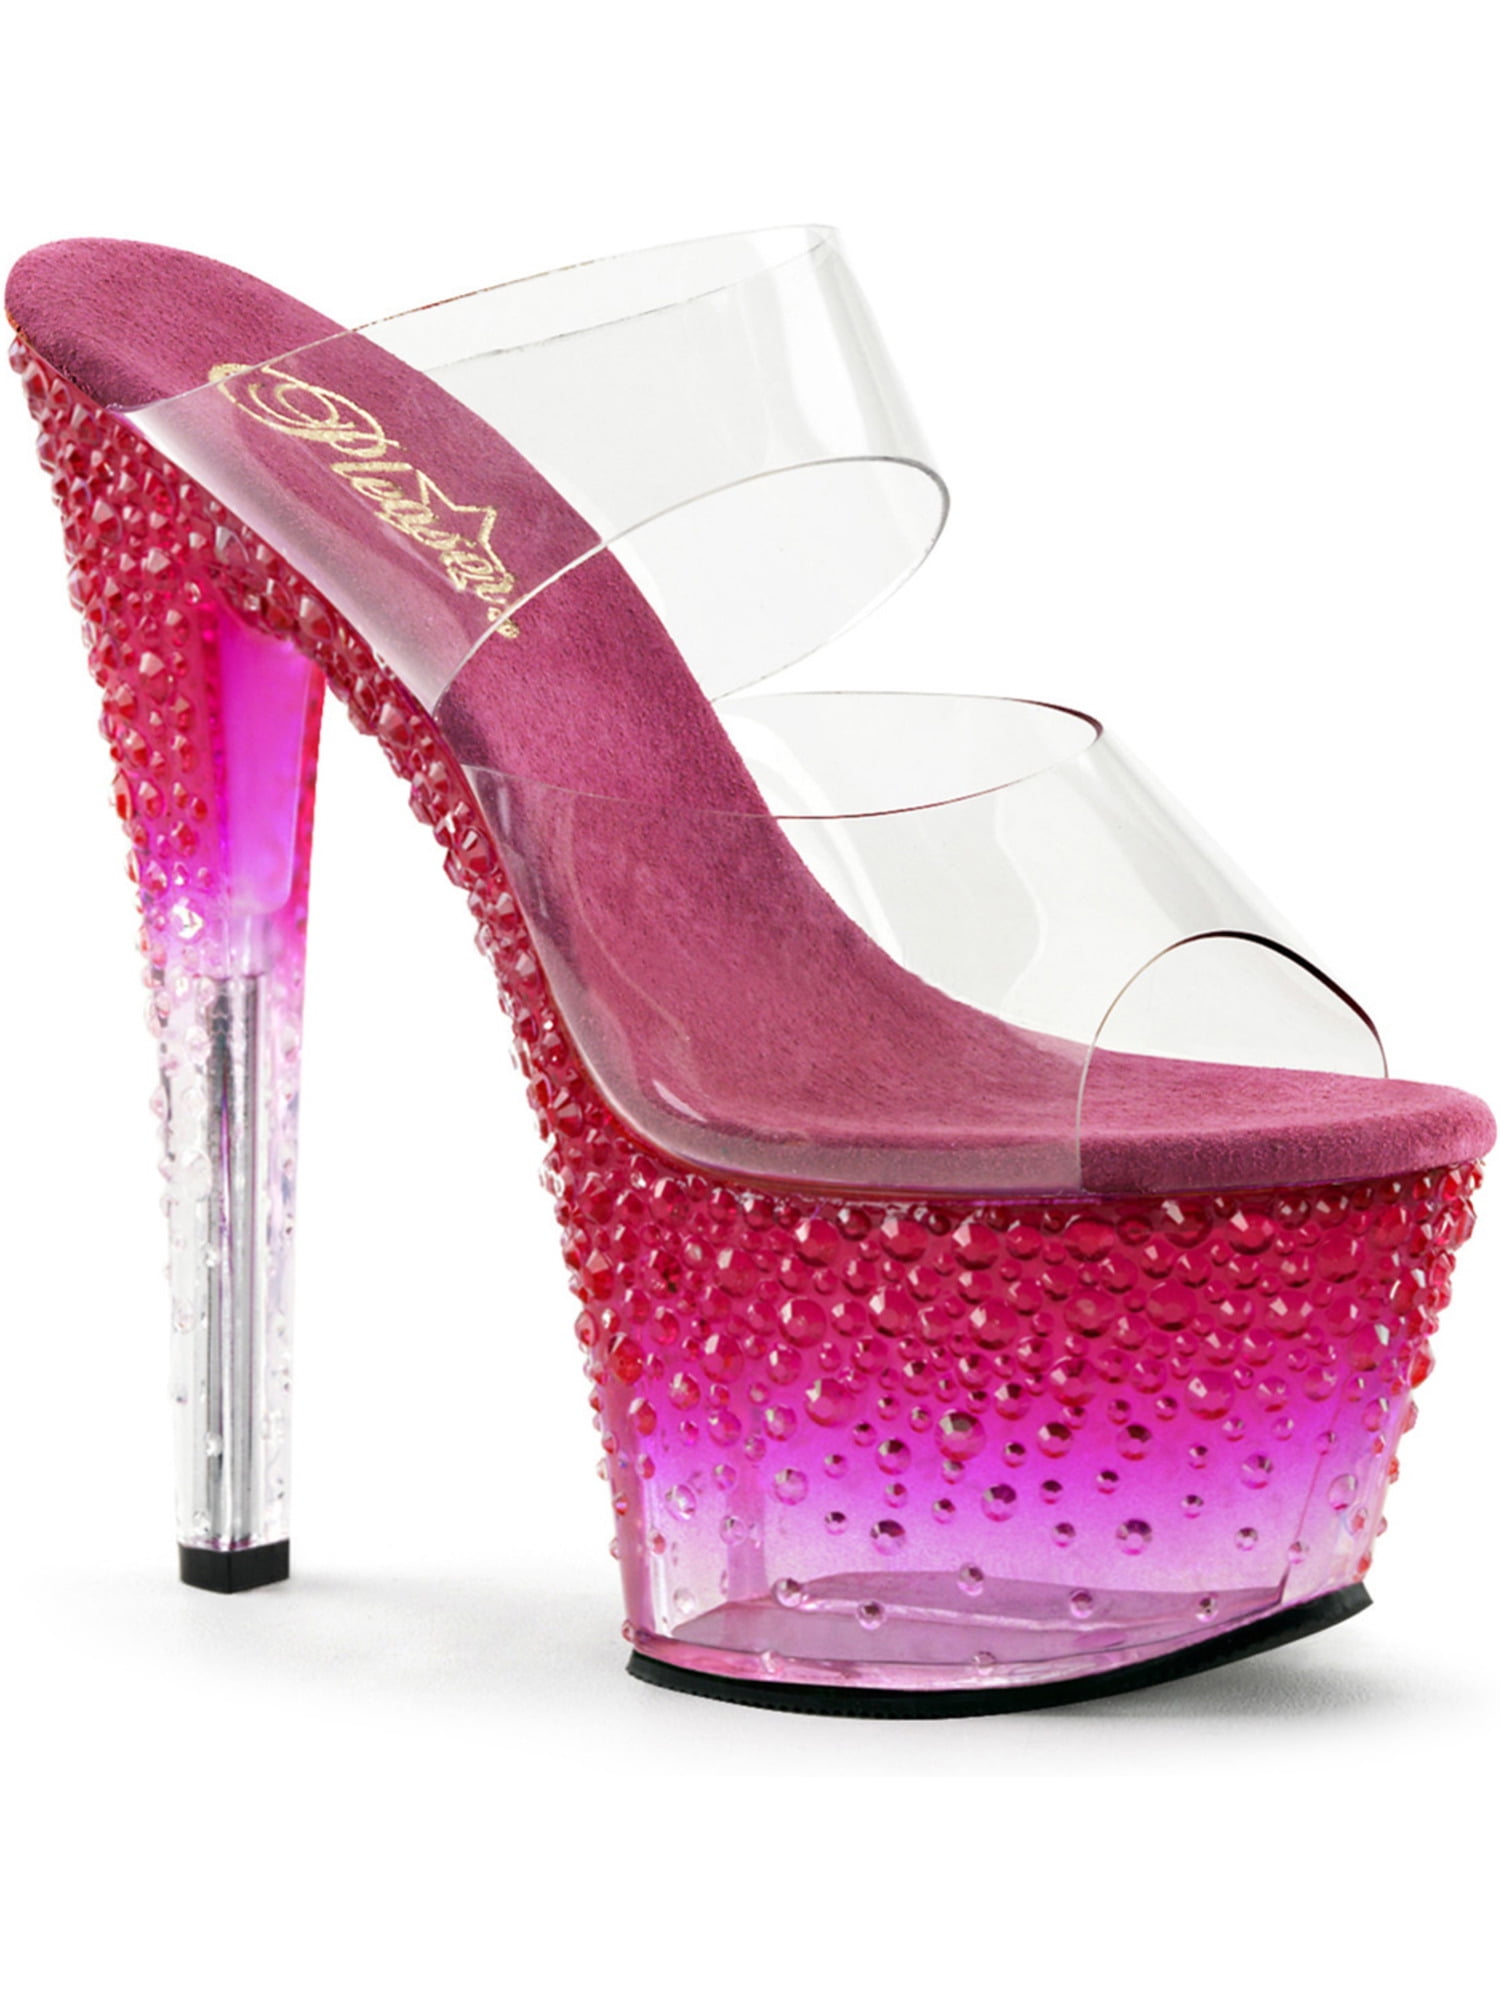 Pleaser - Womens Pink Ombre 7 Inch Rhinestone High Heels Shoes with ...